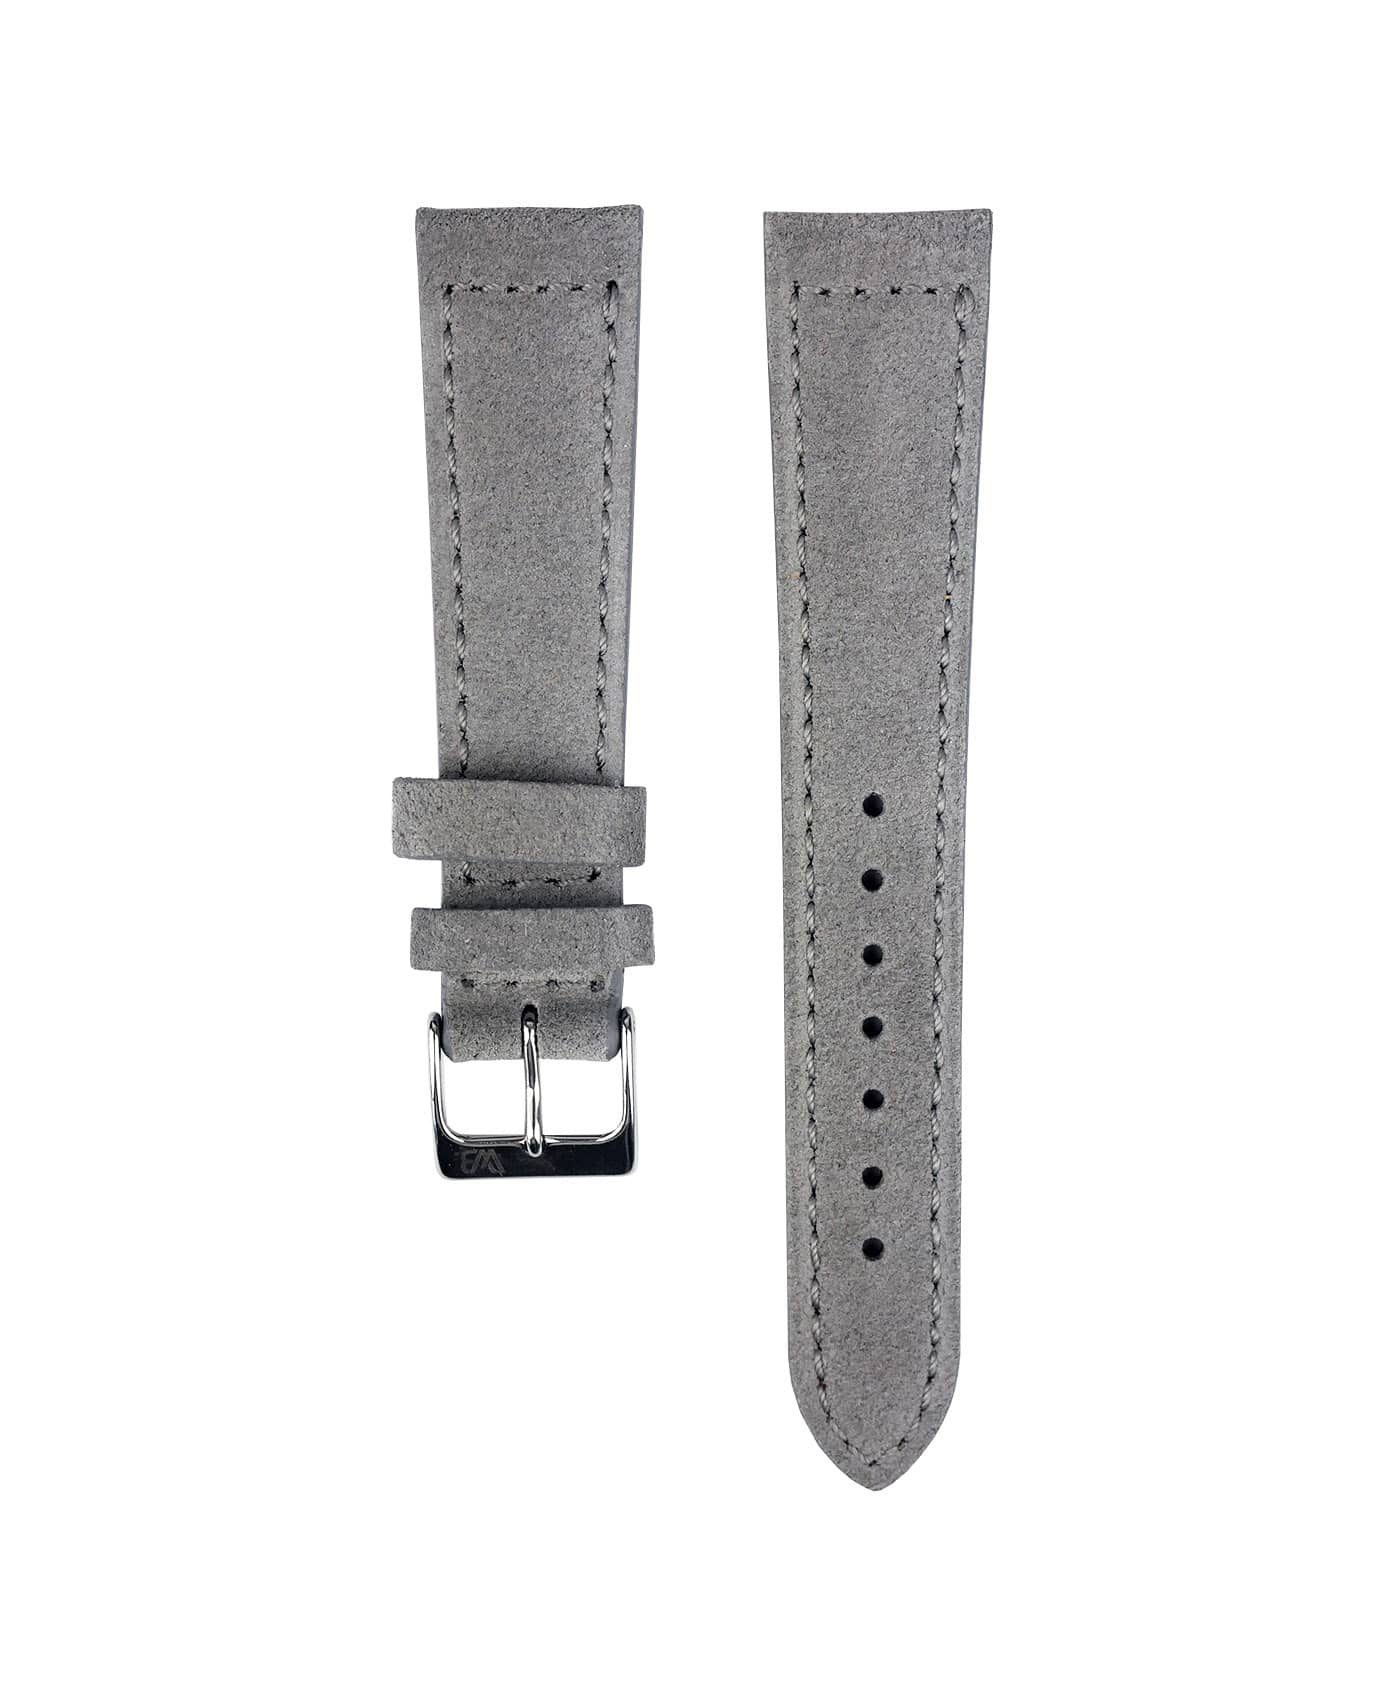 Suede leather strap with side seam_grey_front